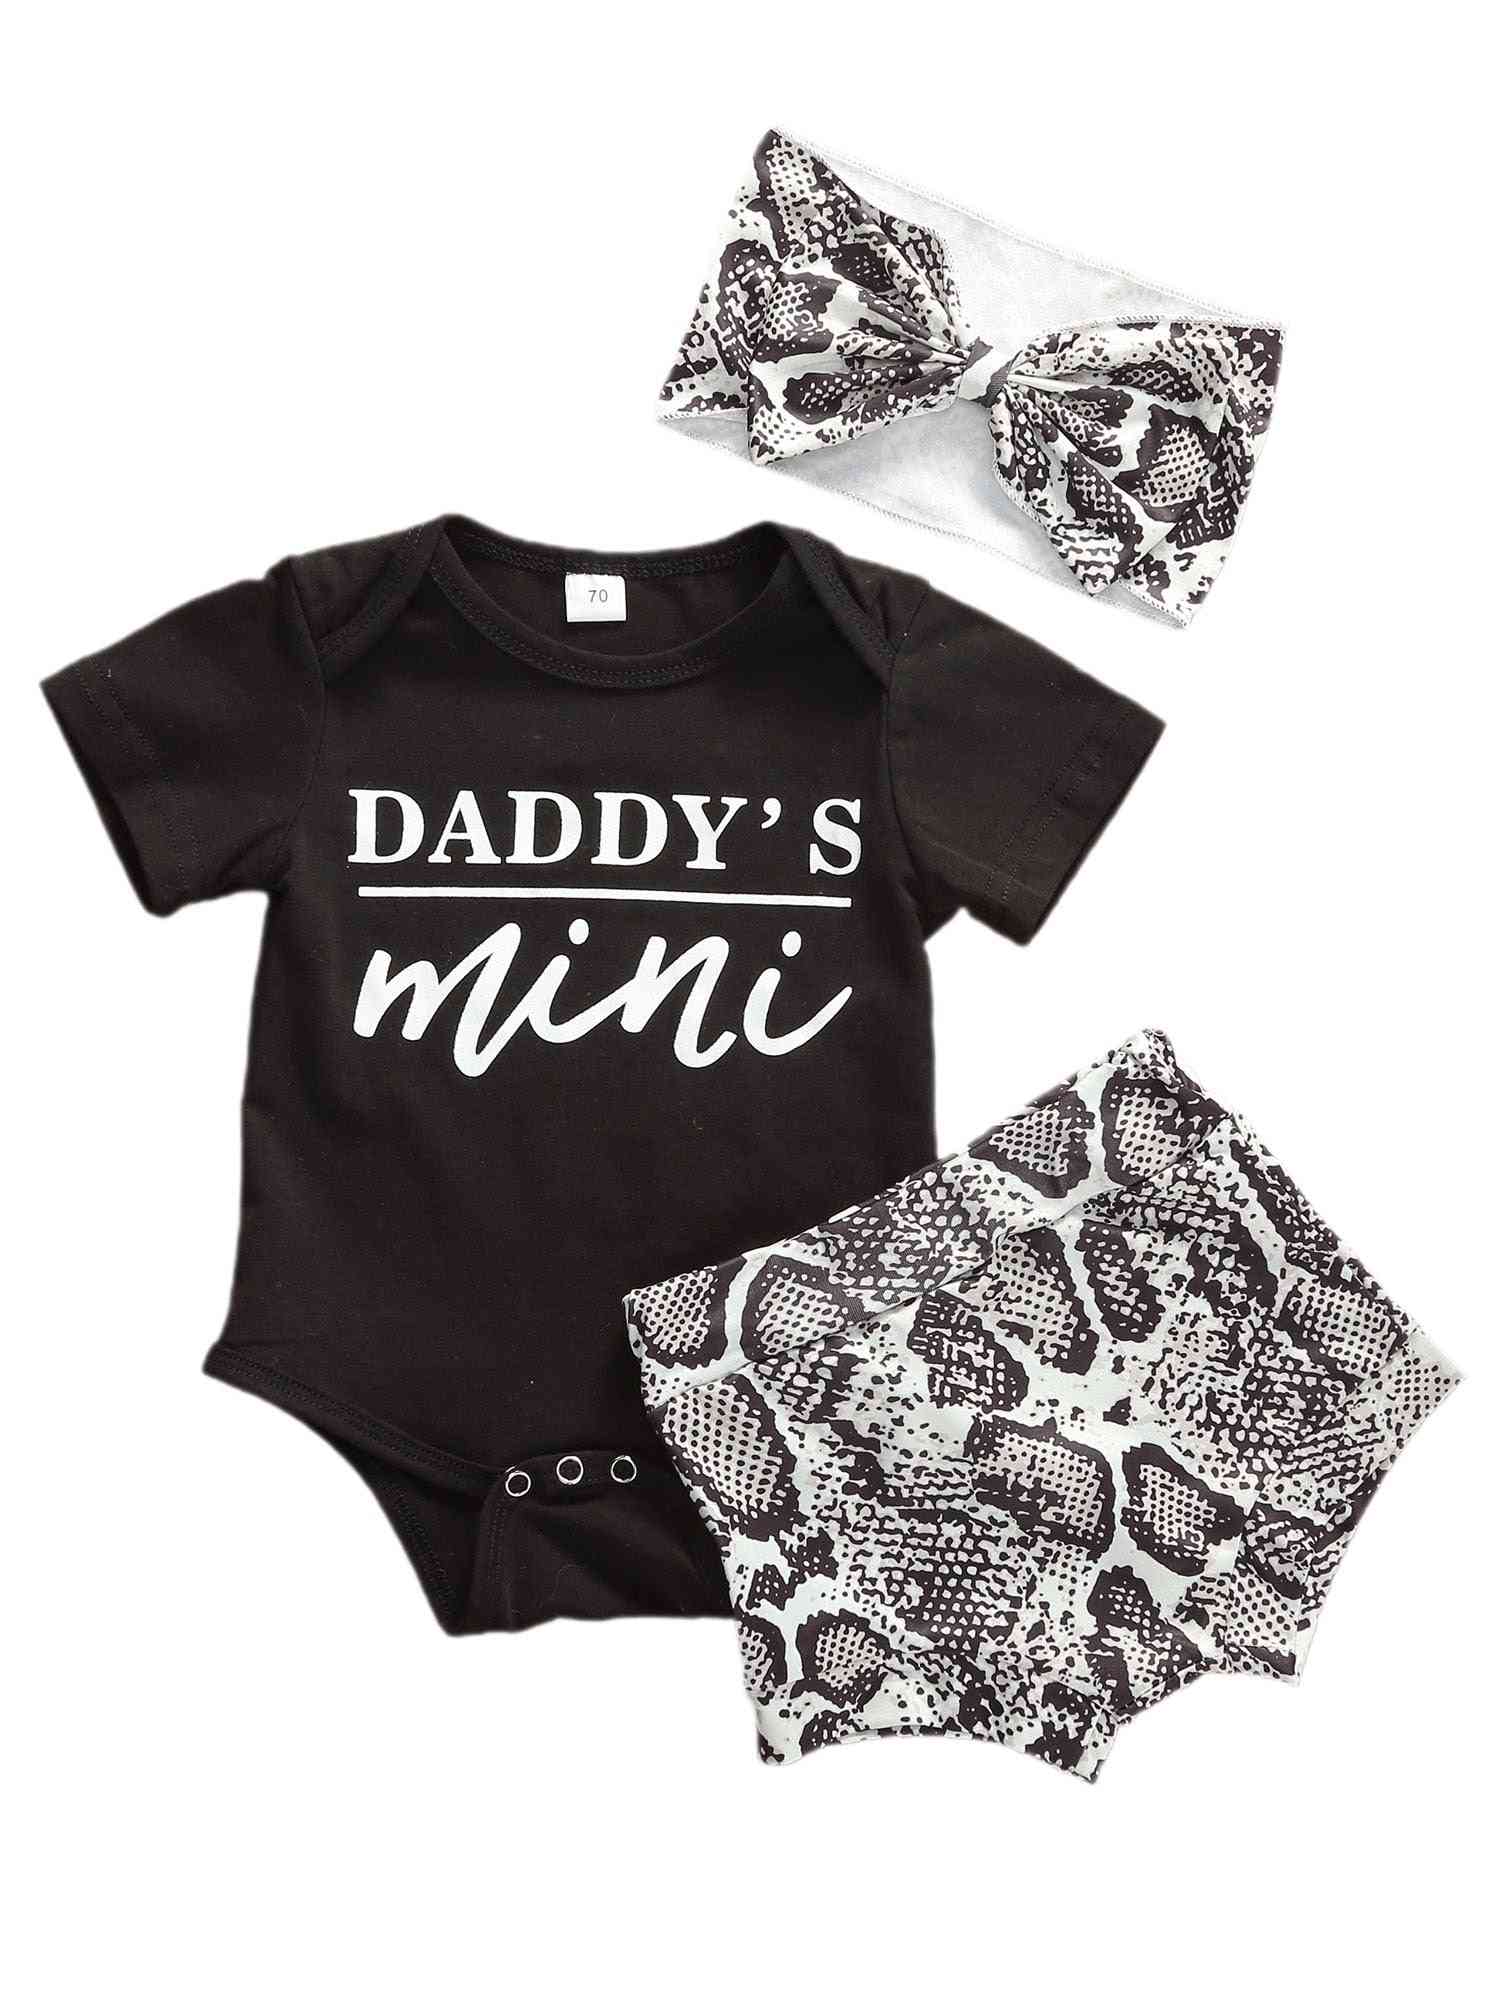 Daddy's Mini Printed- Shorts Sleeve Tops, Shorts And Headband For Babies